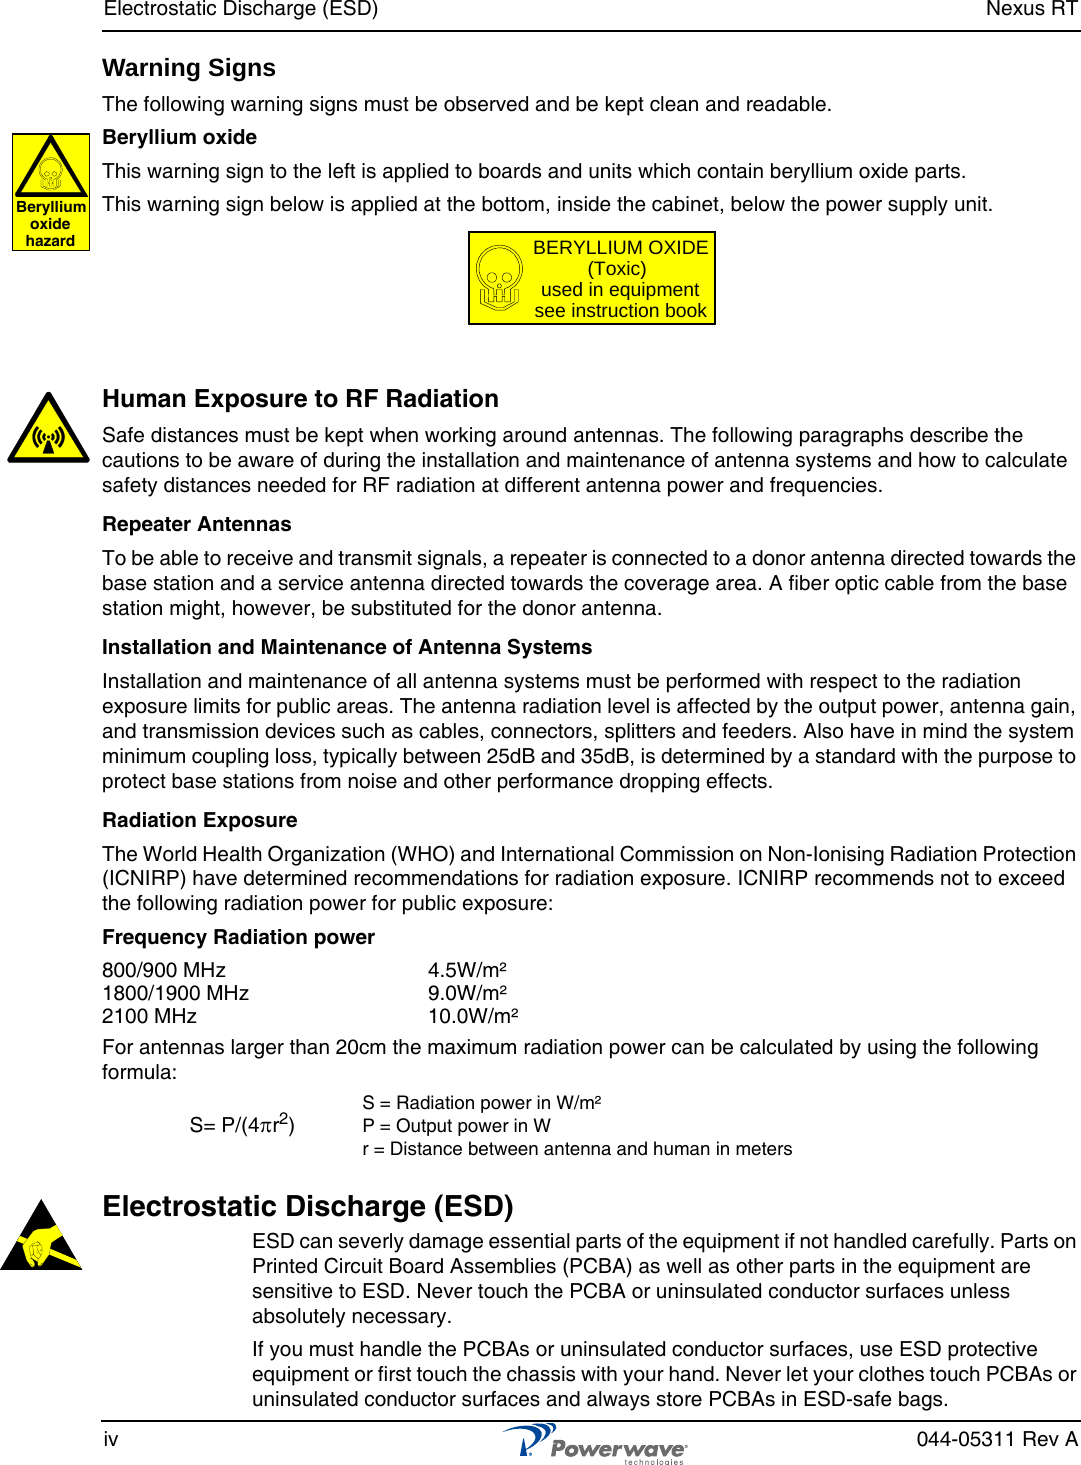 Electrostatic Discharge (ESD) Nexus RTiv 044-05311 Rev AWarning SignsThe following warning signs must be observed and be kept clean and readable.Beryllium oxideThis warning sign to the left is applied to boards and units which contain beryllium oxide parts.This warning sign below is applied at the bottom, inside the cabinet, below the power supply unit.Human Exposure to RF RadiationSafe distances must be kept when working around antennas. The following paragraphs describe the cautions to be aware of during the installation and maintenance of antenna systems and how to calculate safety distances needed for RF radiation at different antenna power and frequencies.Repeater AntennasTo be able to receive and transmit signals, a repeater is connected to a donor antenna directed towards the base station and a service antenna directed towards the coverage area. A fiber optic cable from the base station might, however, be substituted for the donor antenna.Installation and Maintenance of Antenna SystemsInstallation and maintenance of all antenna systems must be performed with respect to the radiation exposure limits for public areas. The antenna radiation level is affected by the output power, antenna gain, and transmission devices such as cables, connectors, splitters and feeders. Also have in mind the system minimum coupling loss, typically between 25dB and 35dB, is determined by a standard with the purpose to protect base stations from noise and other performance dropping effects.Radiation ExposureThe World Health Organization (WHO) and International Commission on Non-Ionising Radiation Protection (ICNIRP) have determined recommendations for radiation exposure. ICNIRP recommends not to exceed the following radiation power for public exposure:Frequency Radiation power800/900 MHz 4.5W/m²1800/1900 MHz 9.0W/m²2100 MHz 10.0W/m²For antennas larger than 20cm the maximum radiation power can be calculated by using the following formula:Electrostatic Discharge (ESD) ESD can severly damage essential parts of the equipment if not handled carefully. Parts on Printed Circuit Board Assemblies (PCBA) as well as other parts in the equipment are sensitive to ESD. Never touch the PCBA or uninsulated conductor surfaces unless absolutely necessary.If you must handle the PCBAs or uninsulated conductor surfaces, use ESD protective equipment or first touch the chassis with your hand. Never let your clothes touch PCBAs or uninsulated conductor surfaces and always store PCBAs in ESD-safe bags.S= P/(4πr2)S = Radiation power in W/m²P = Output power in Wr = Distance between antenna and human in metersBerylliumoxidehazardBERYLLIUM OXIDE(Toxic)used in equipmentsee instruction book